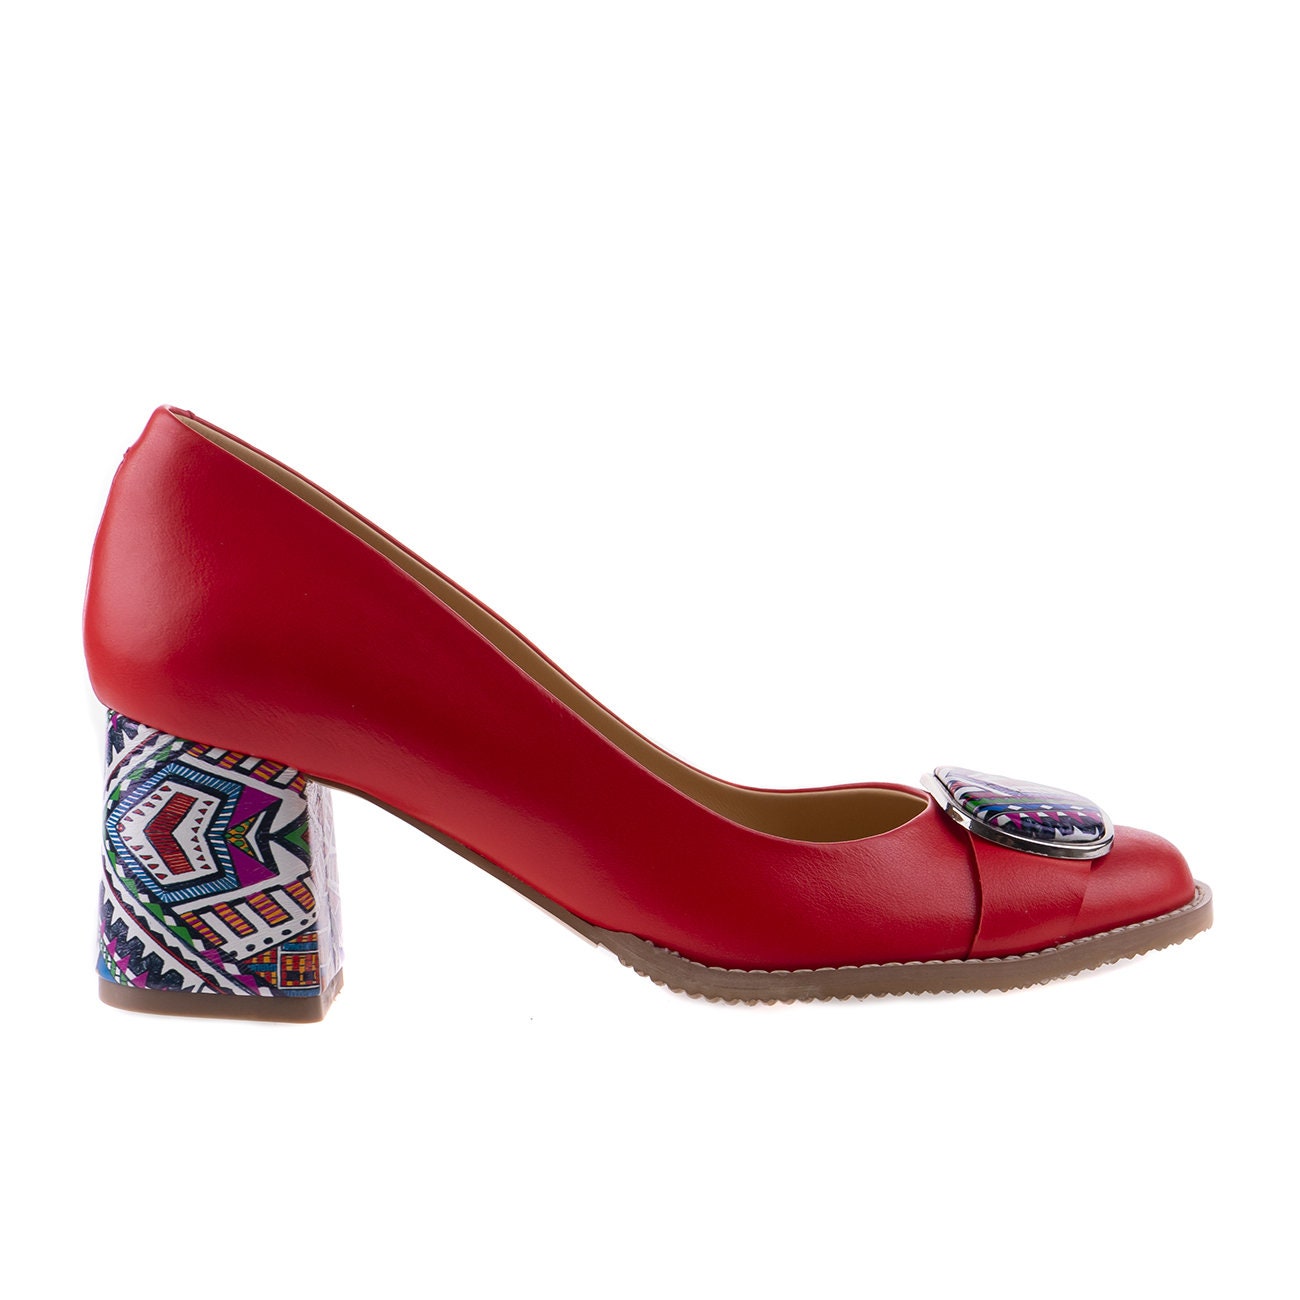 Elegant Red Women's Shoes With Patterned Heel and Ornament 